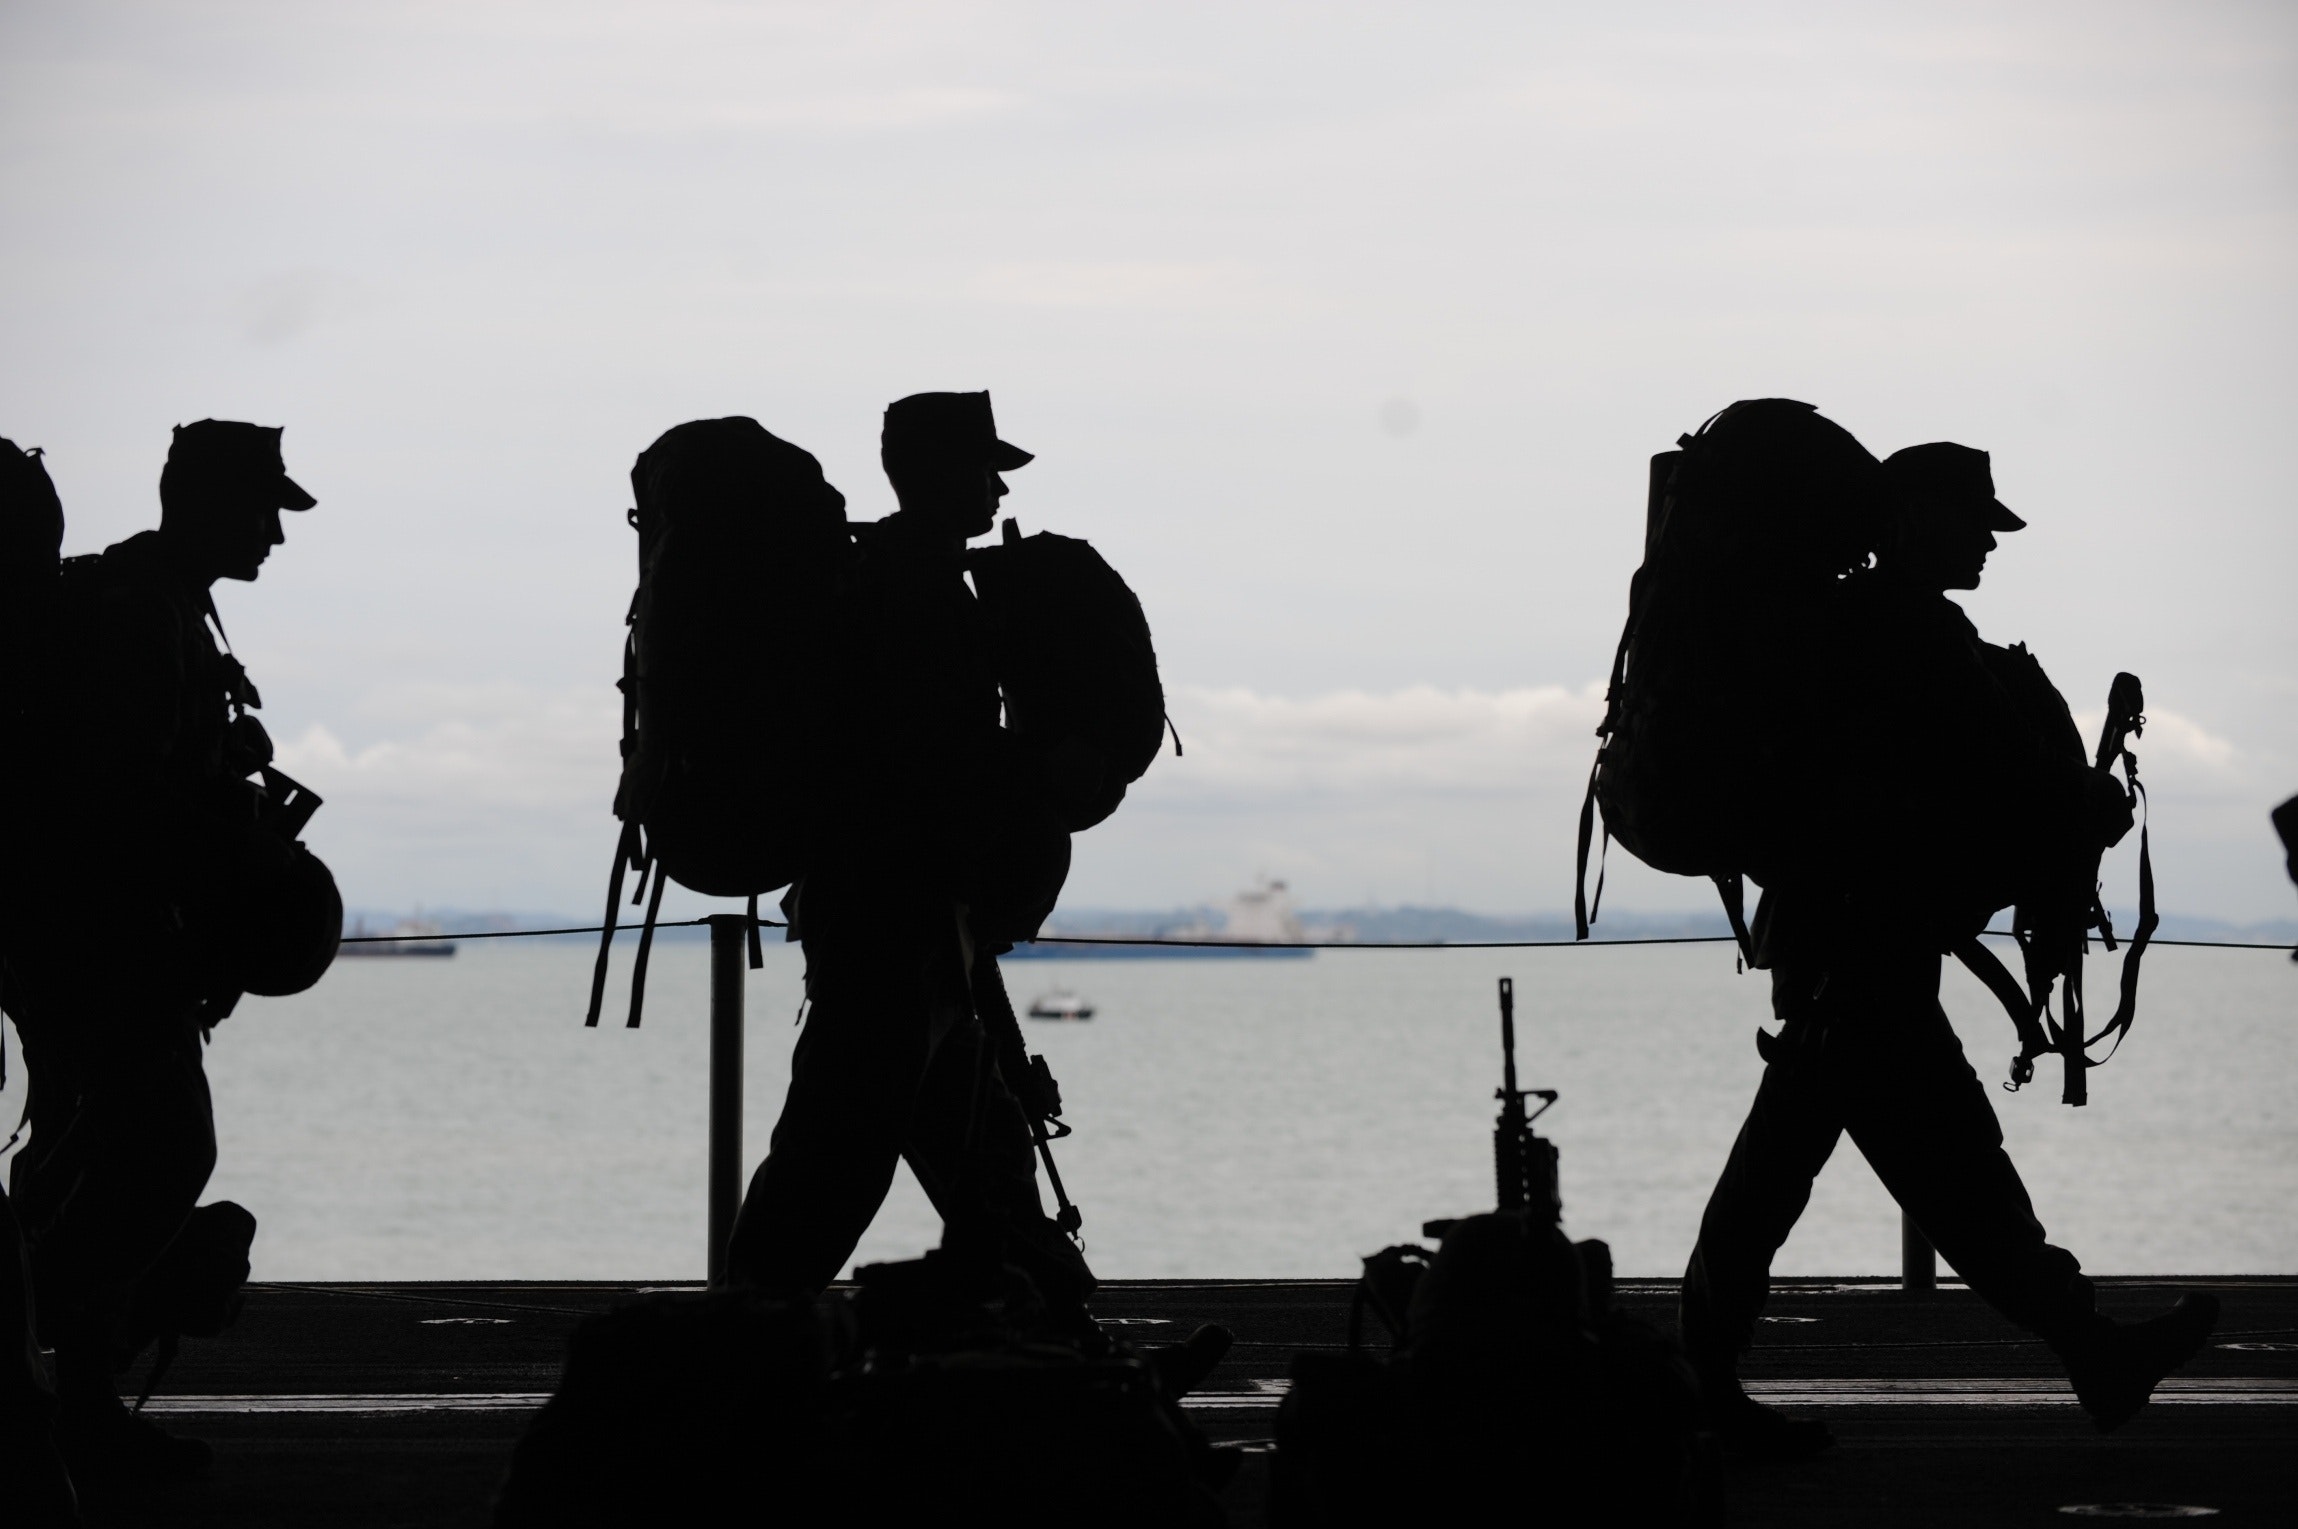 three veterans in shadow walk across a scene of water. Veterans are at risk for specific mental health problems because of their time serving.